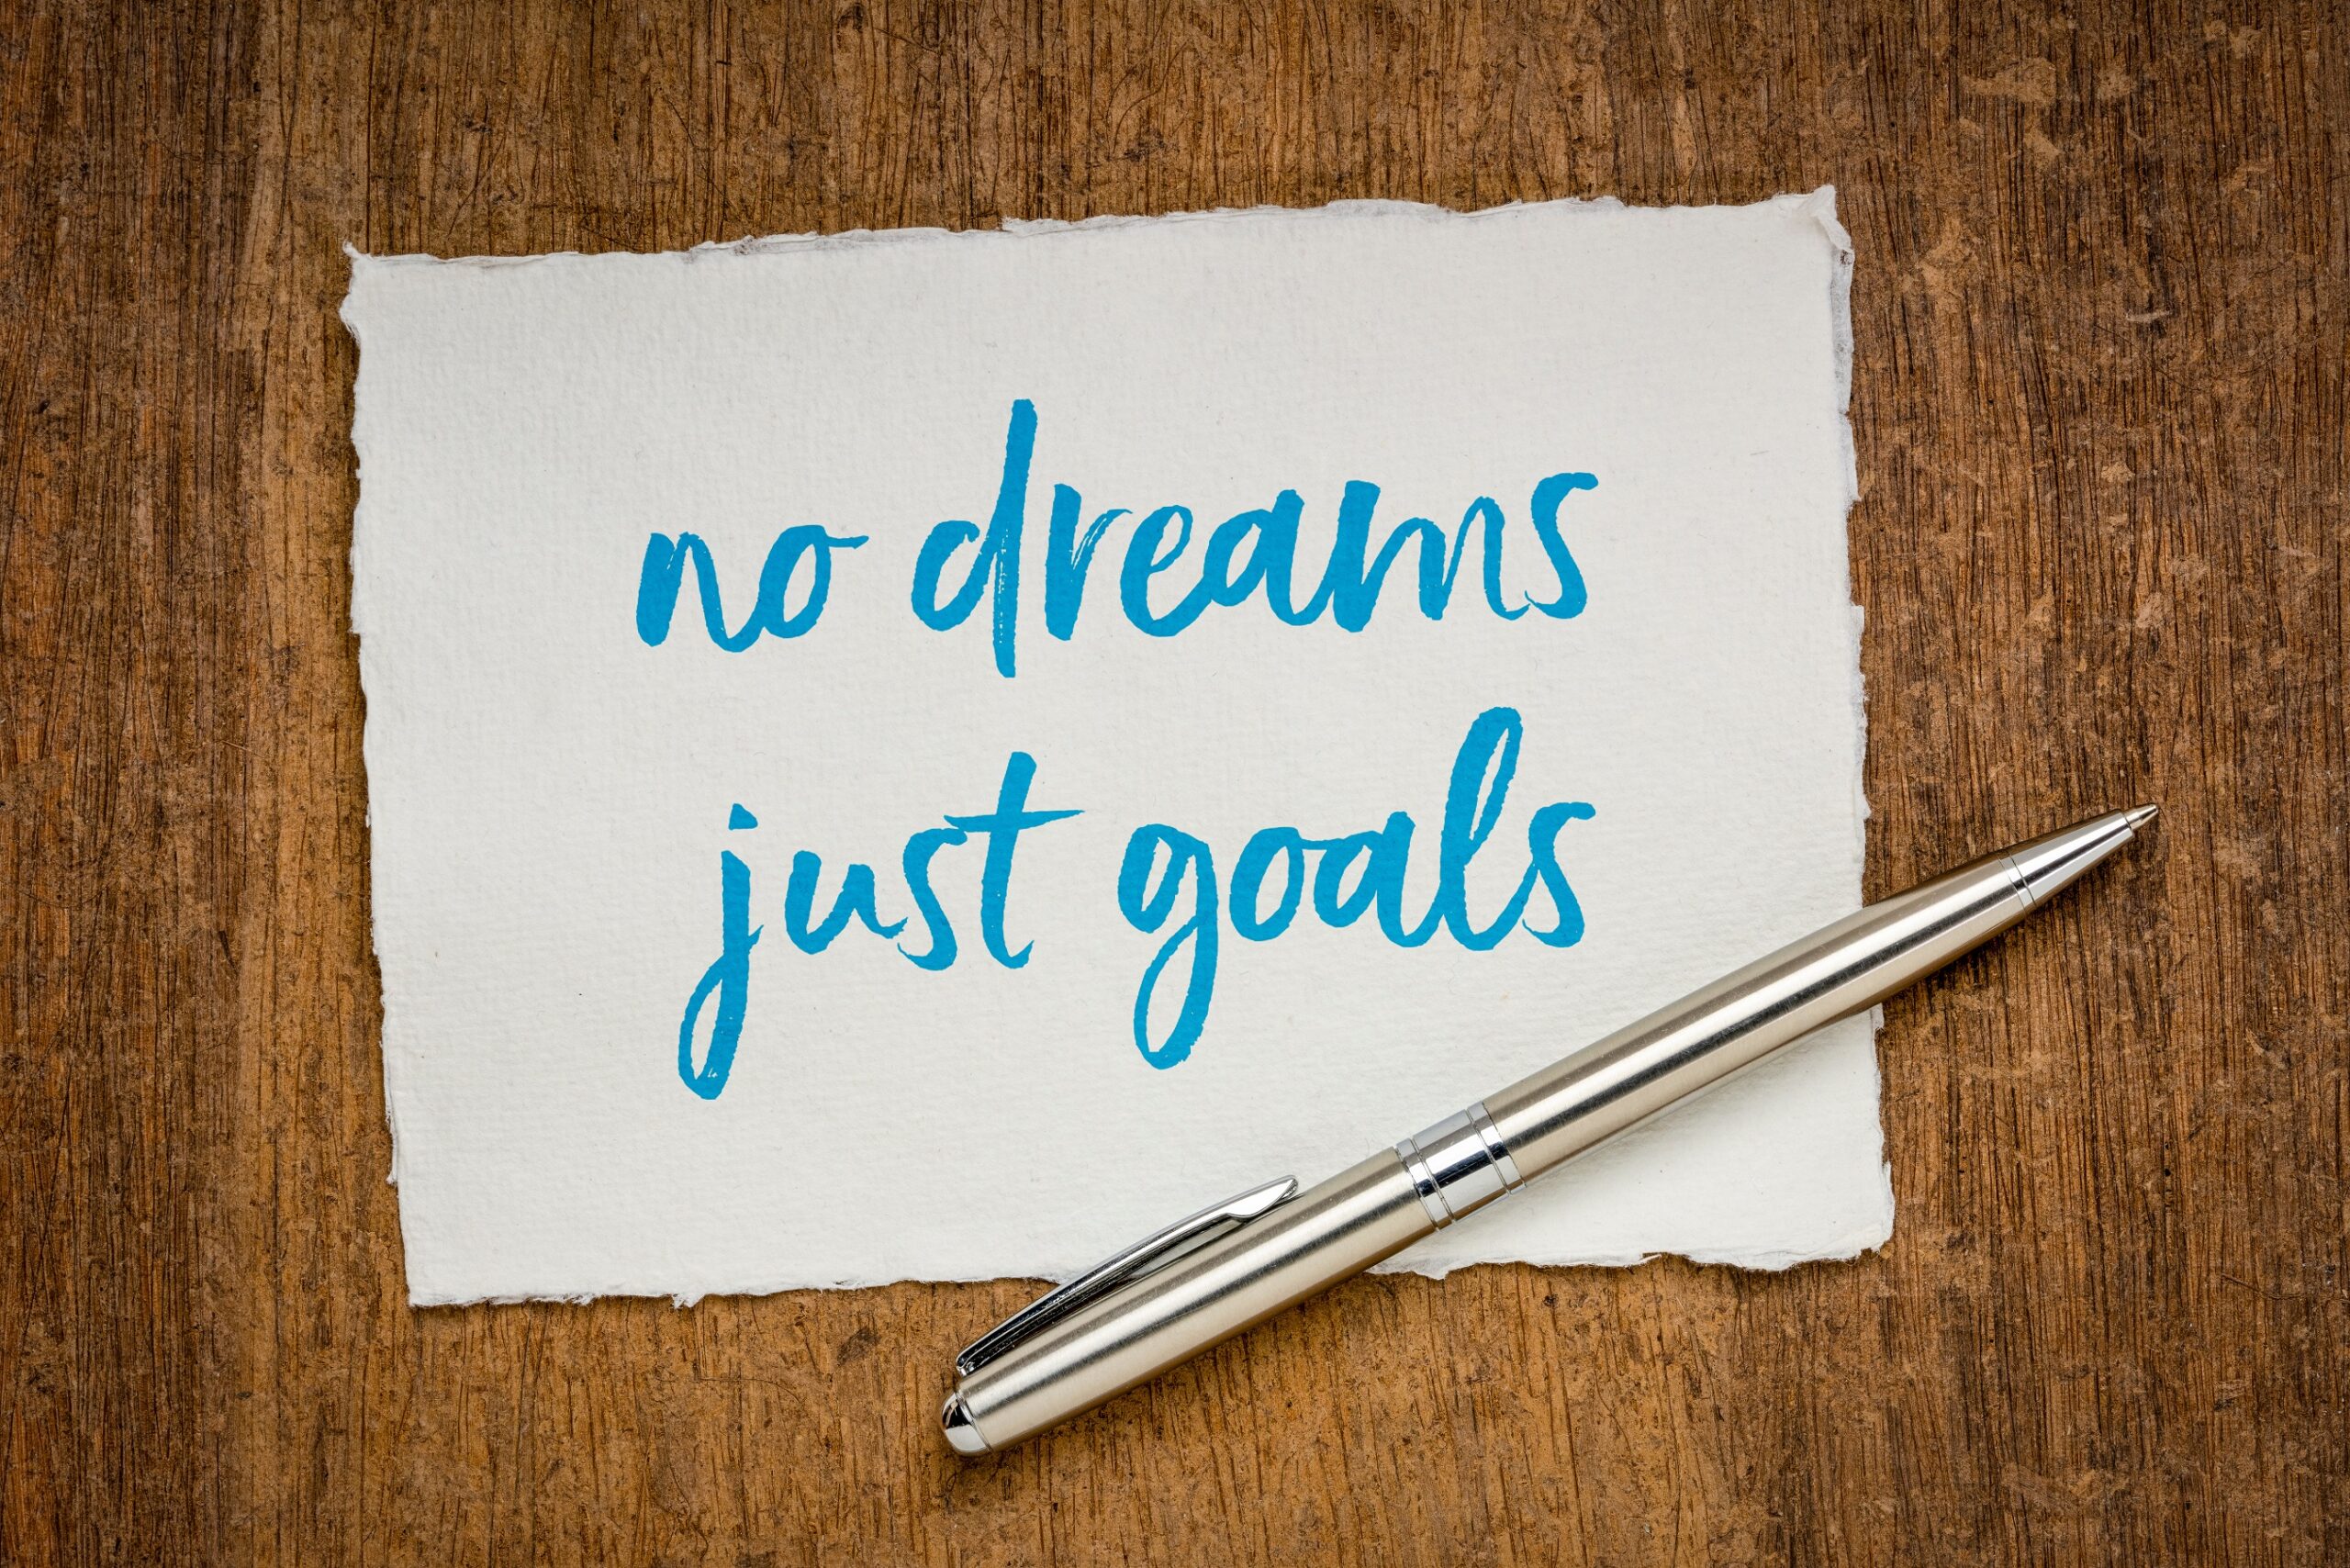 Setting Goals and Following Through